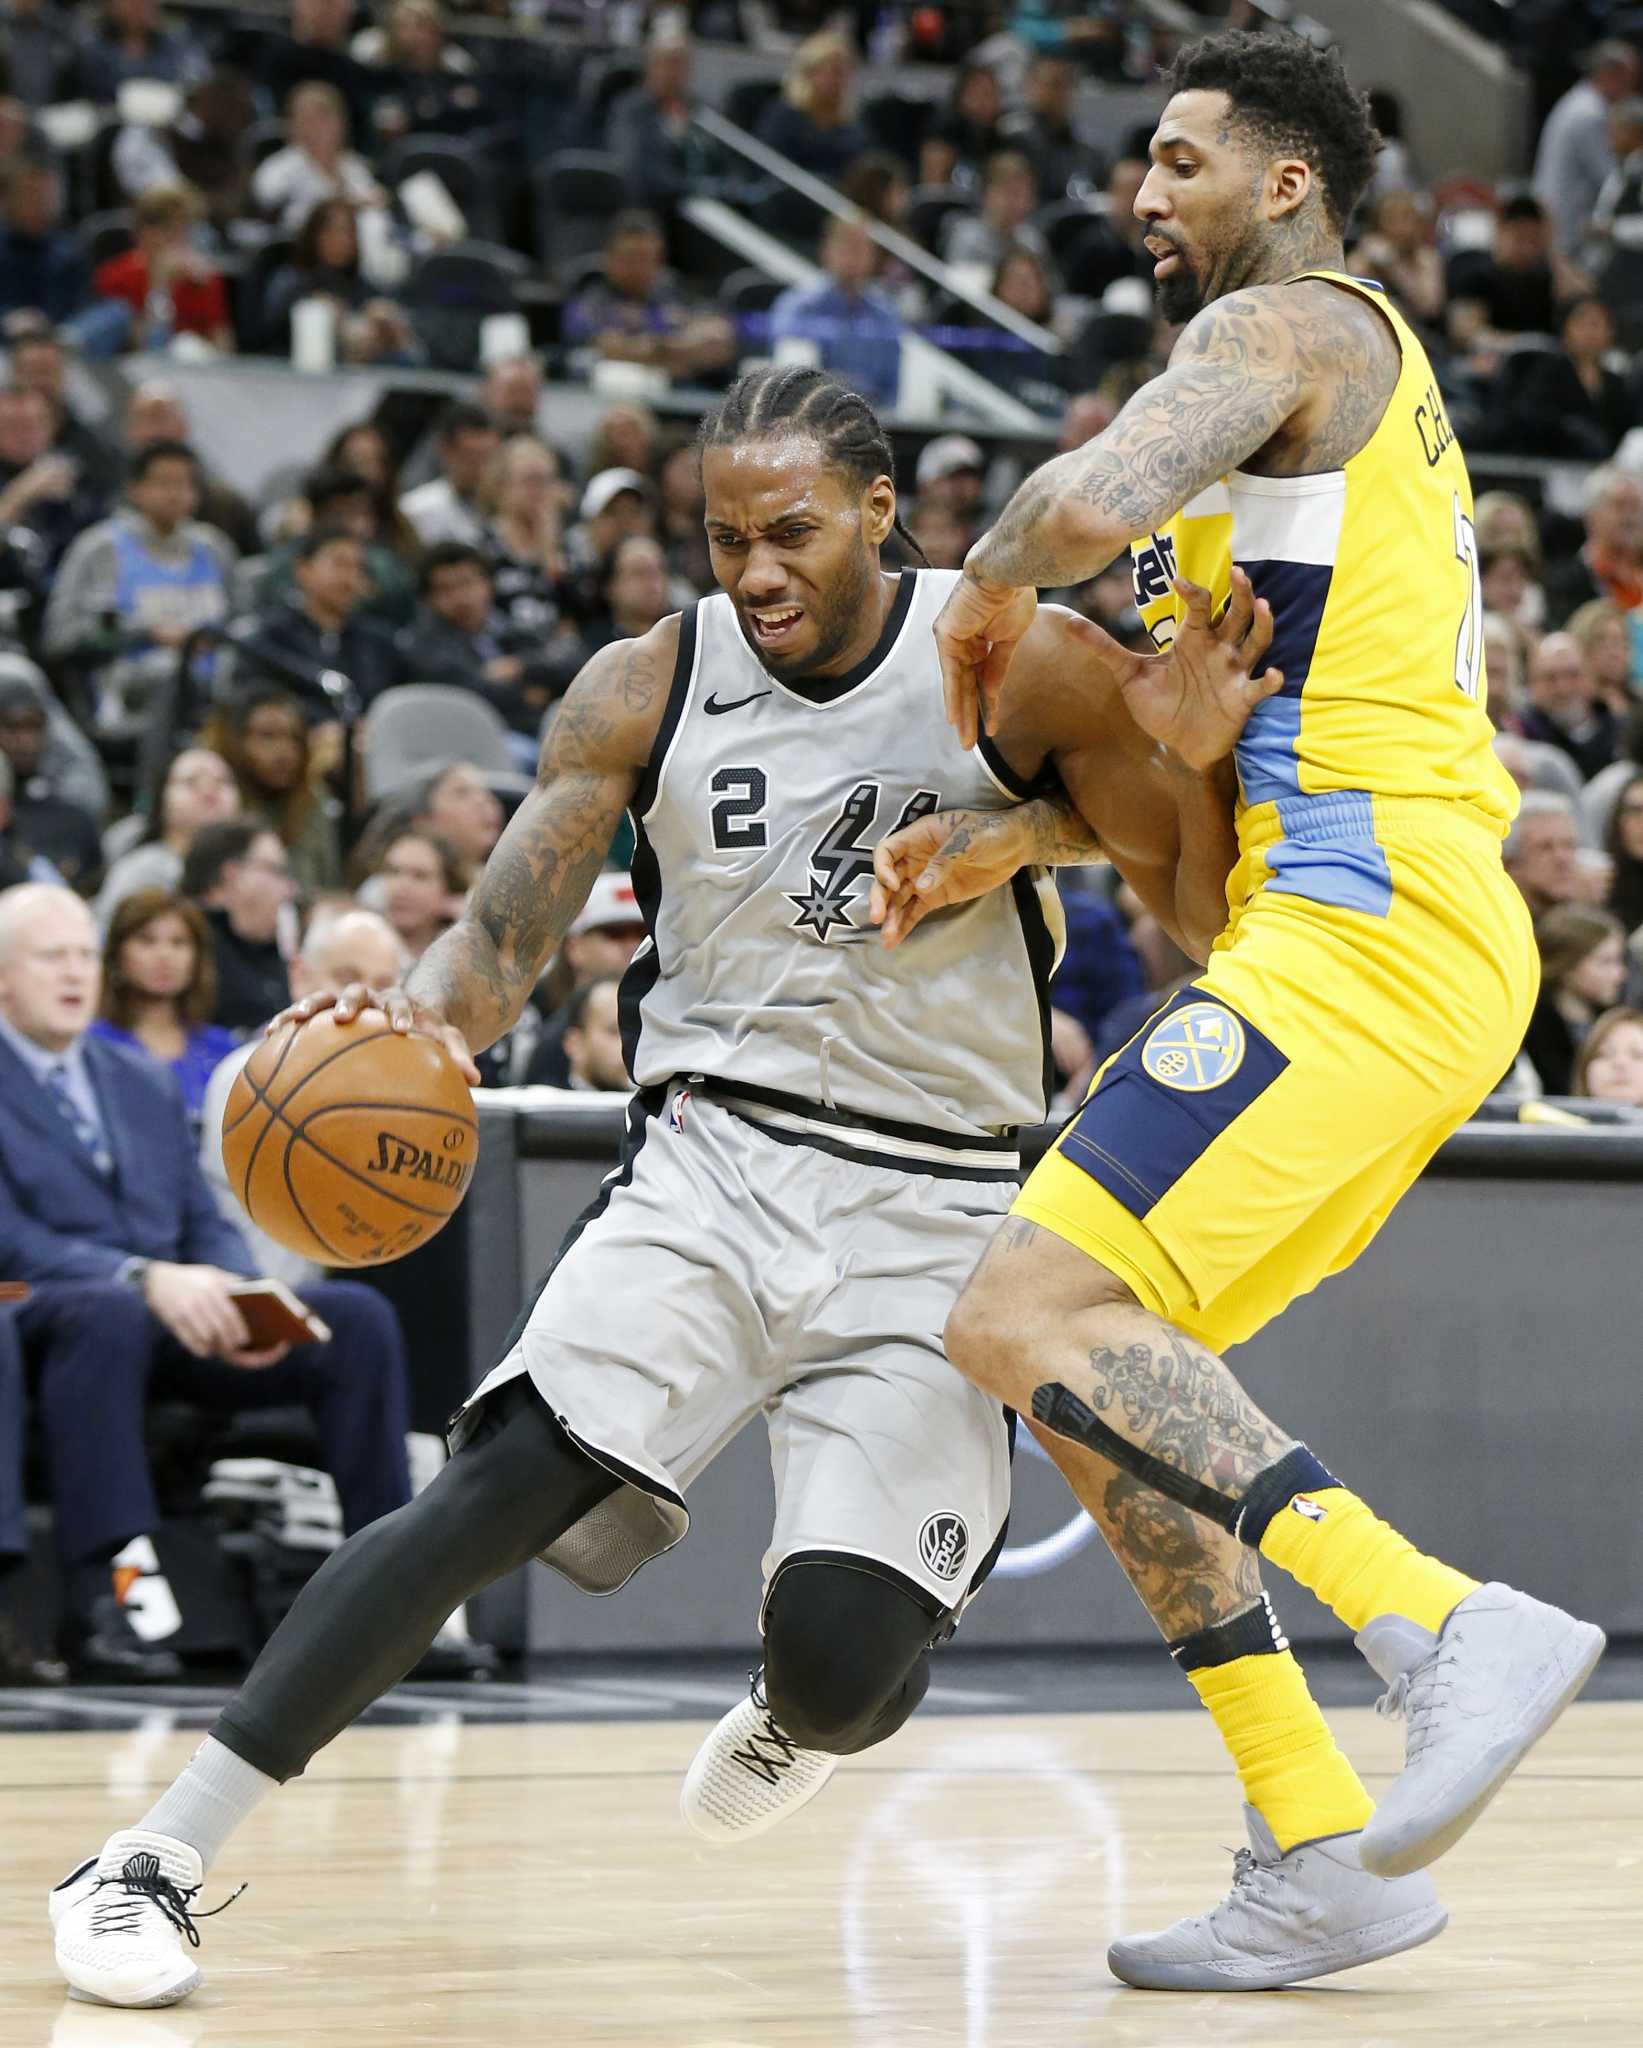 Report: Spurs rank fourth in NBA in local TV ratings